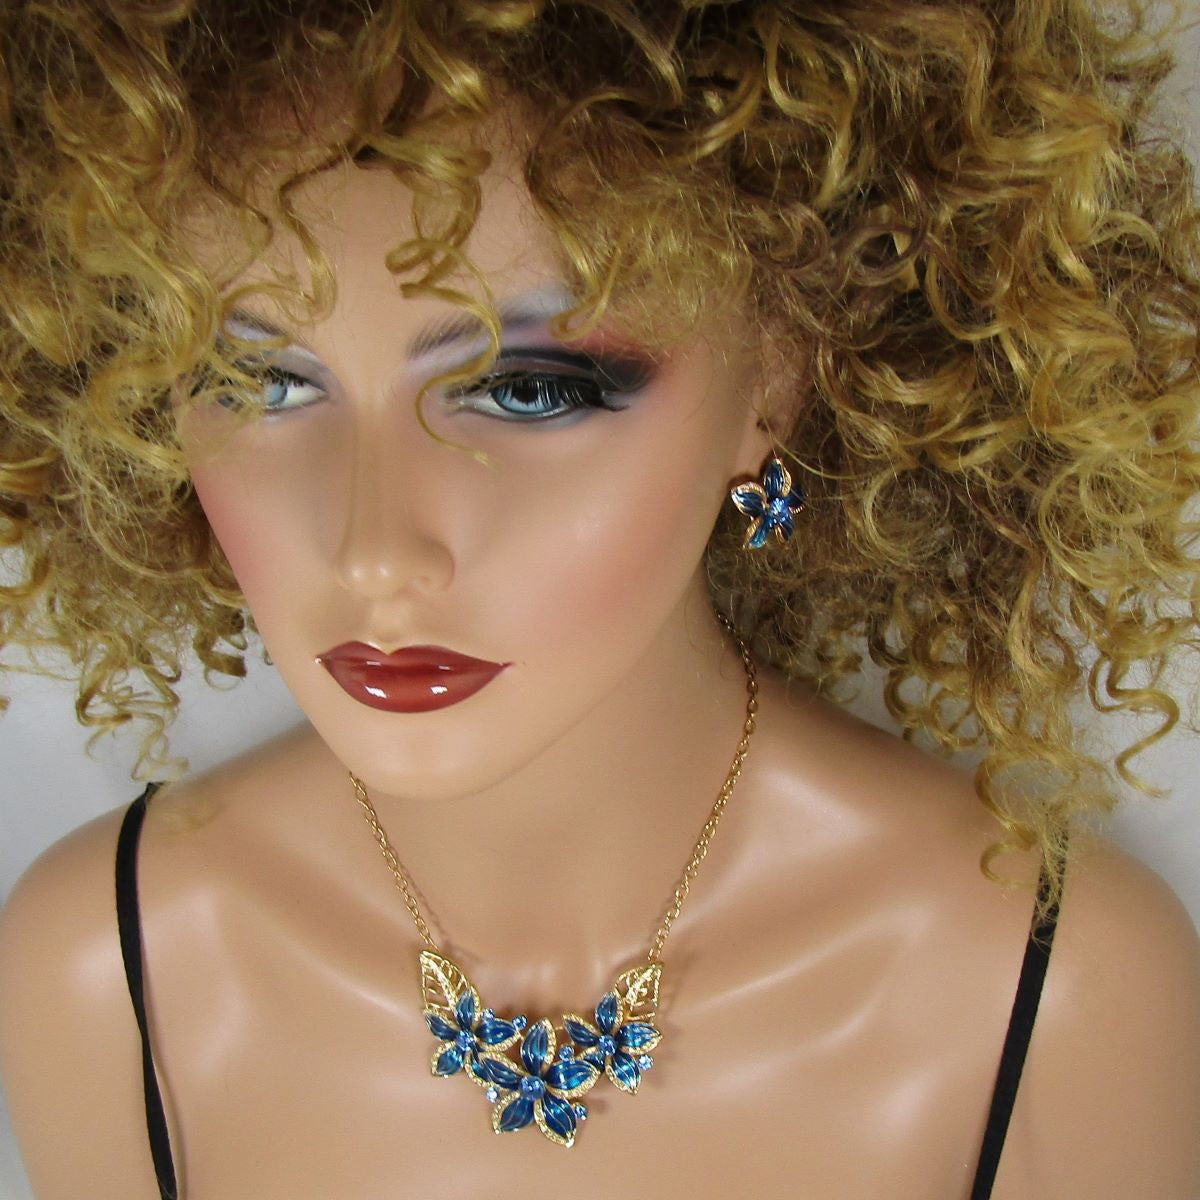 Blue & Gold Flower Necklace with Gold Chain & Earrings - VP's Jewelry